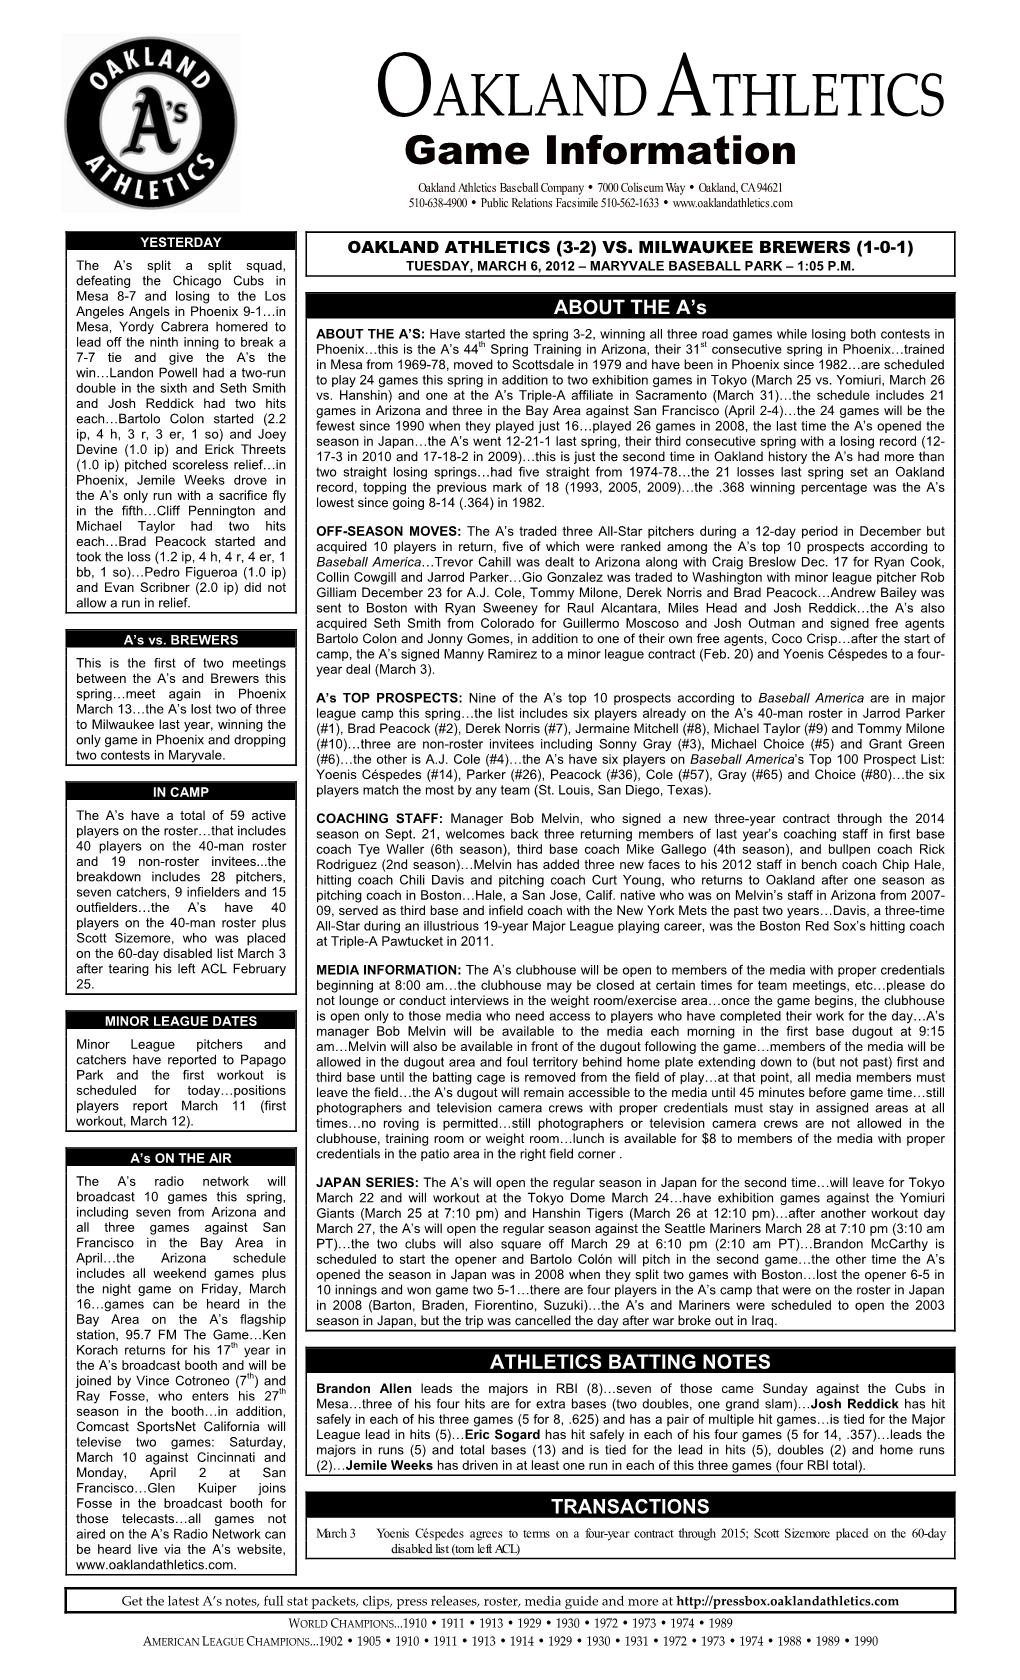 03-06-2012 A's Game Notes